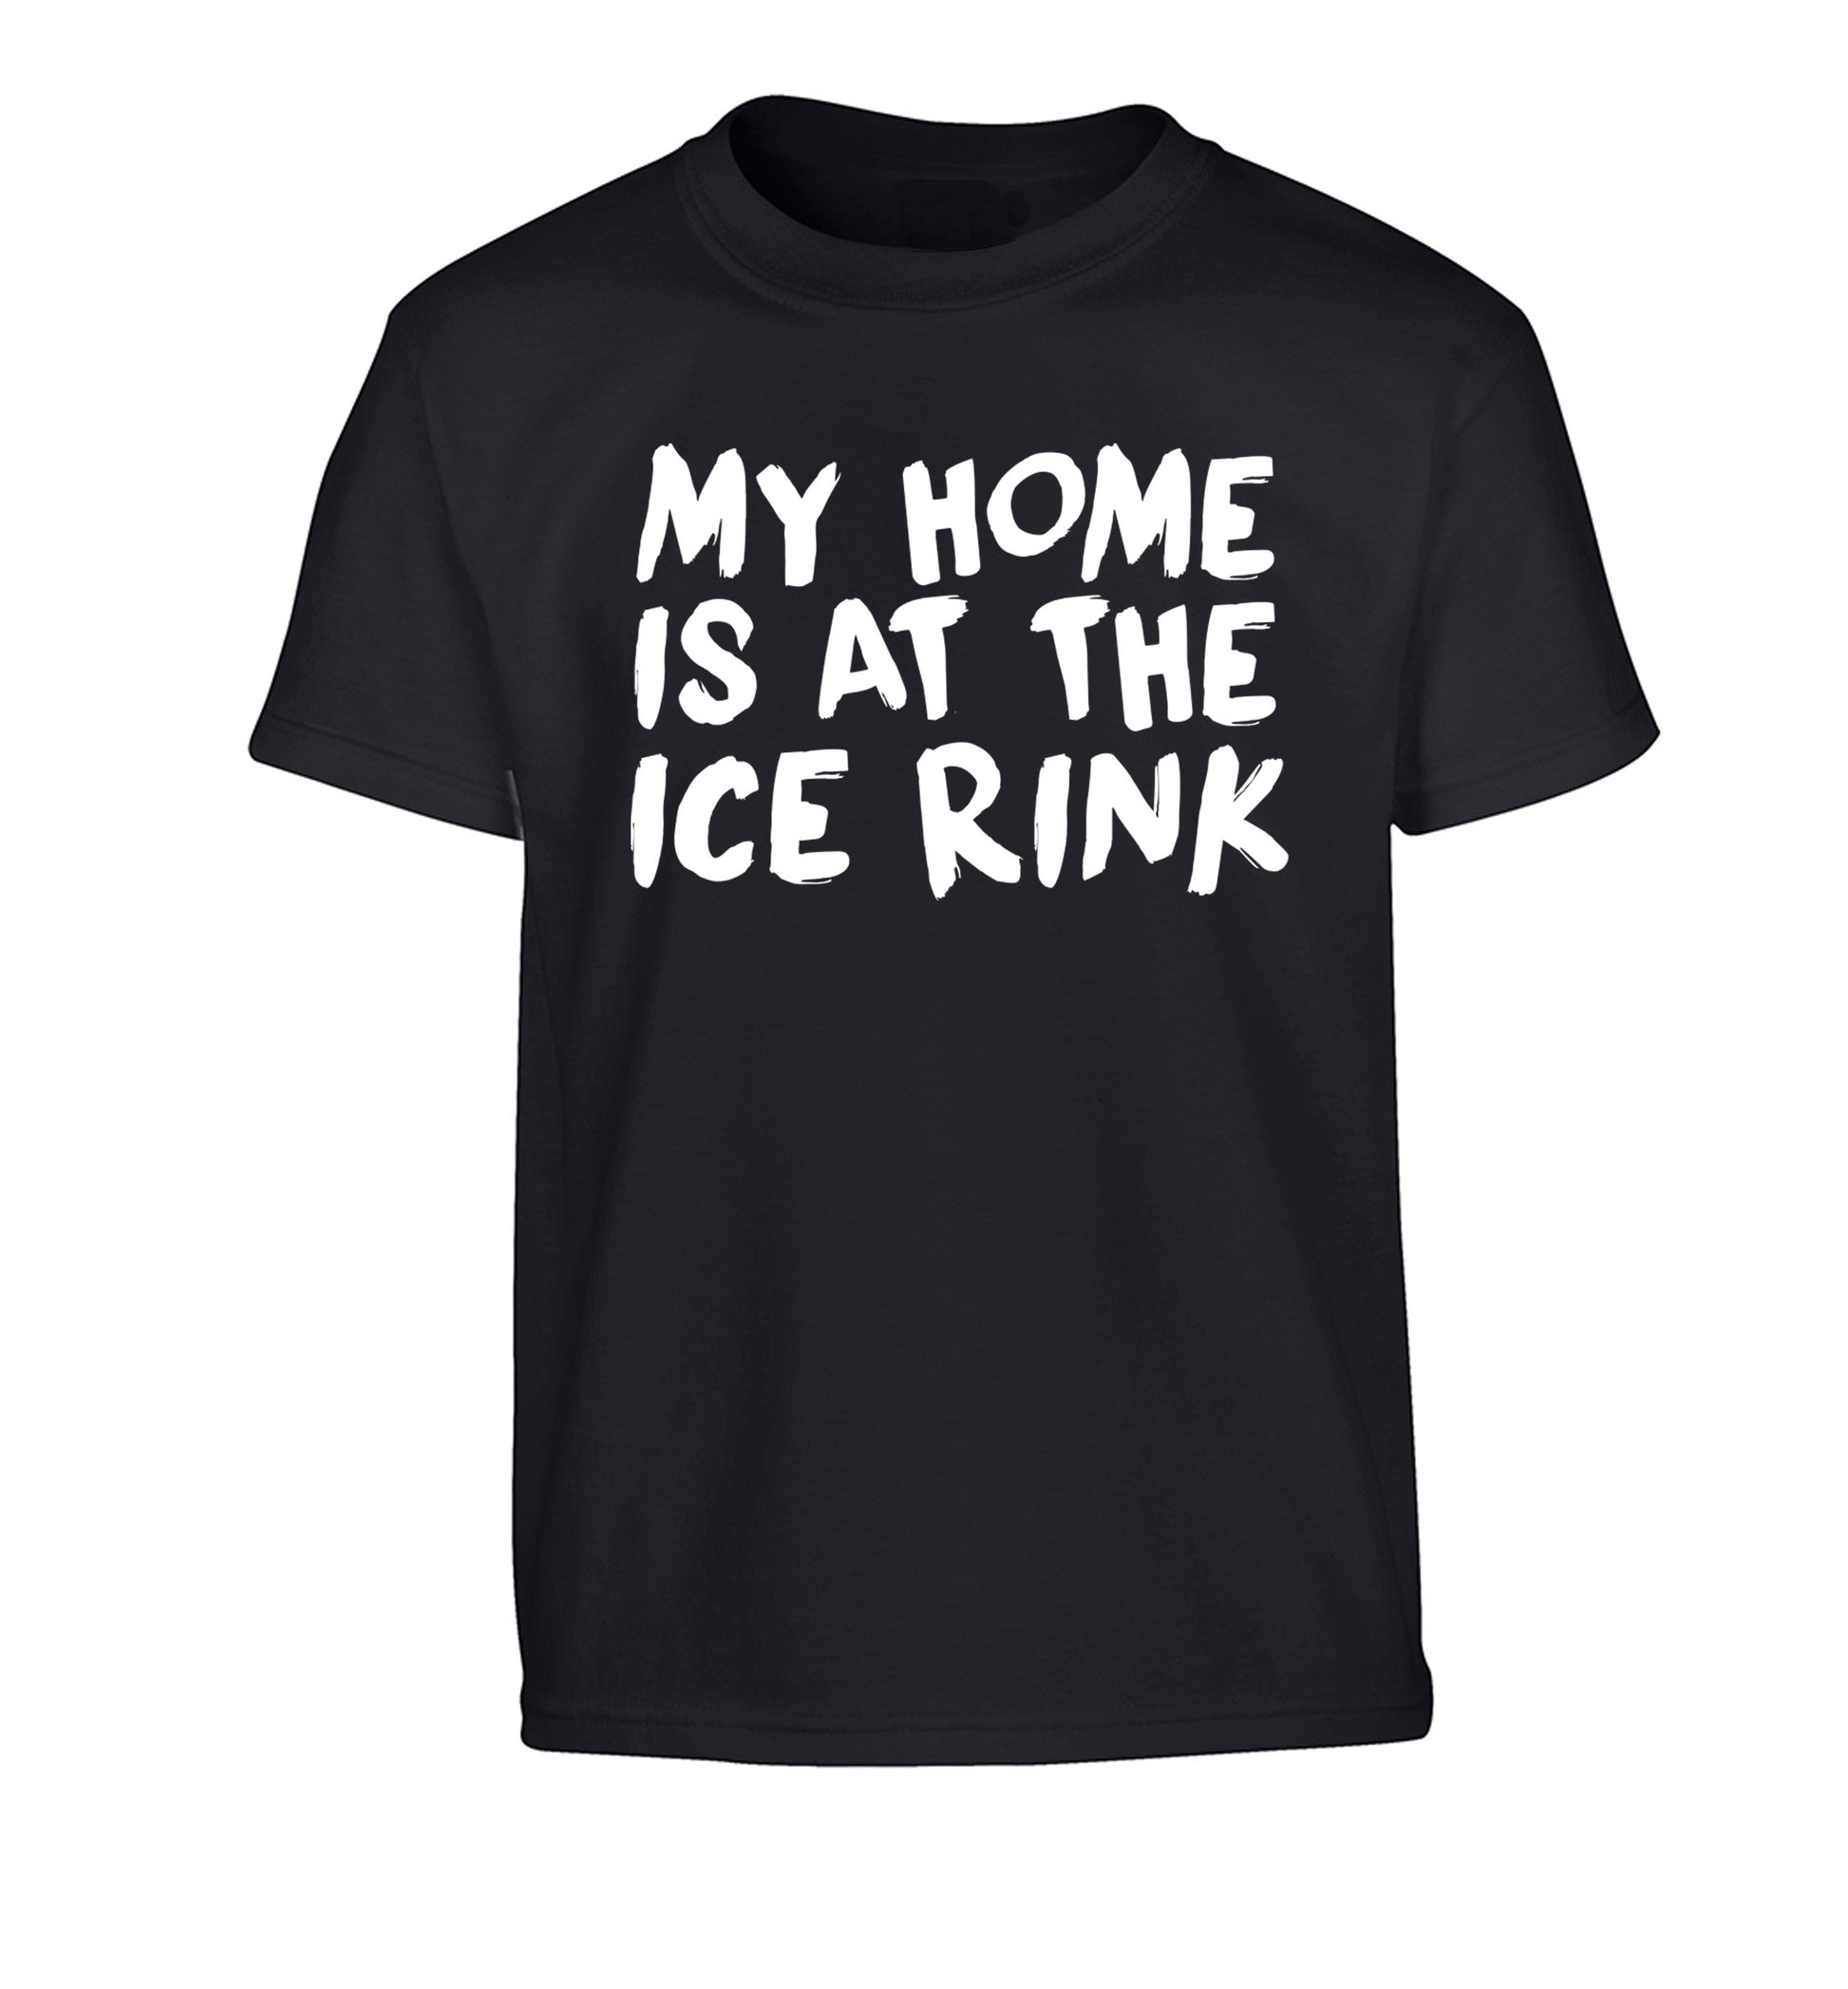 My home is at the ice rink Children's black Tshirt 12-14 Years